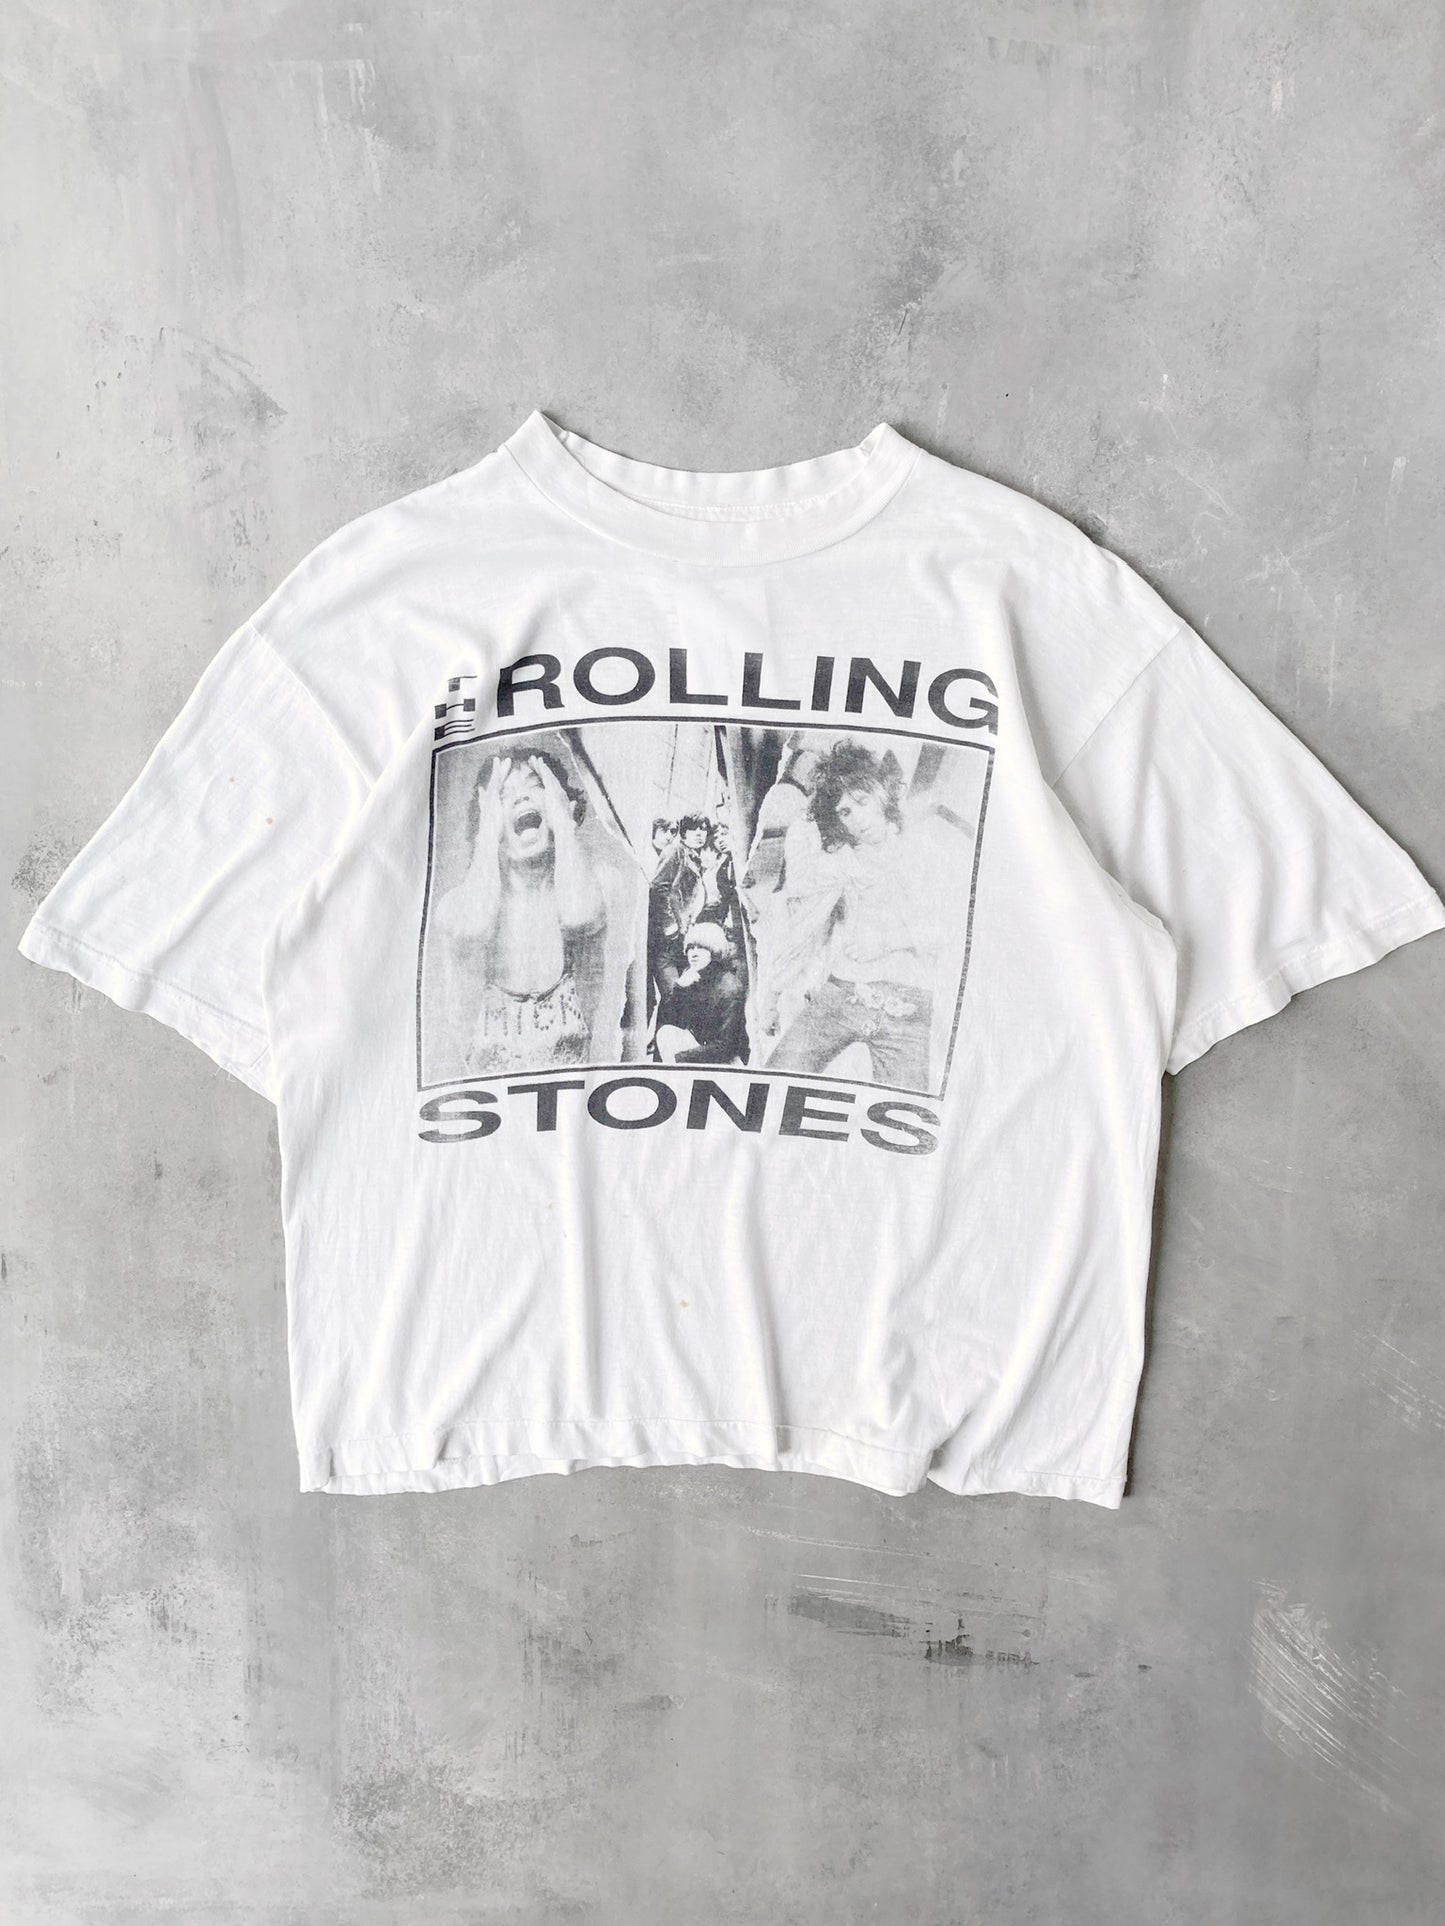 The Rolling Stones T-Shirt 90's - Large